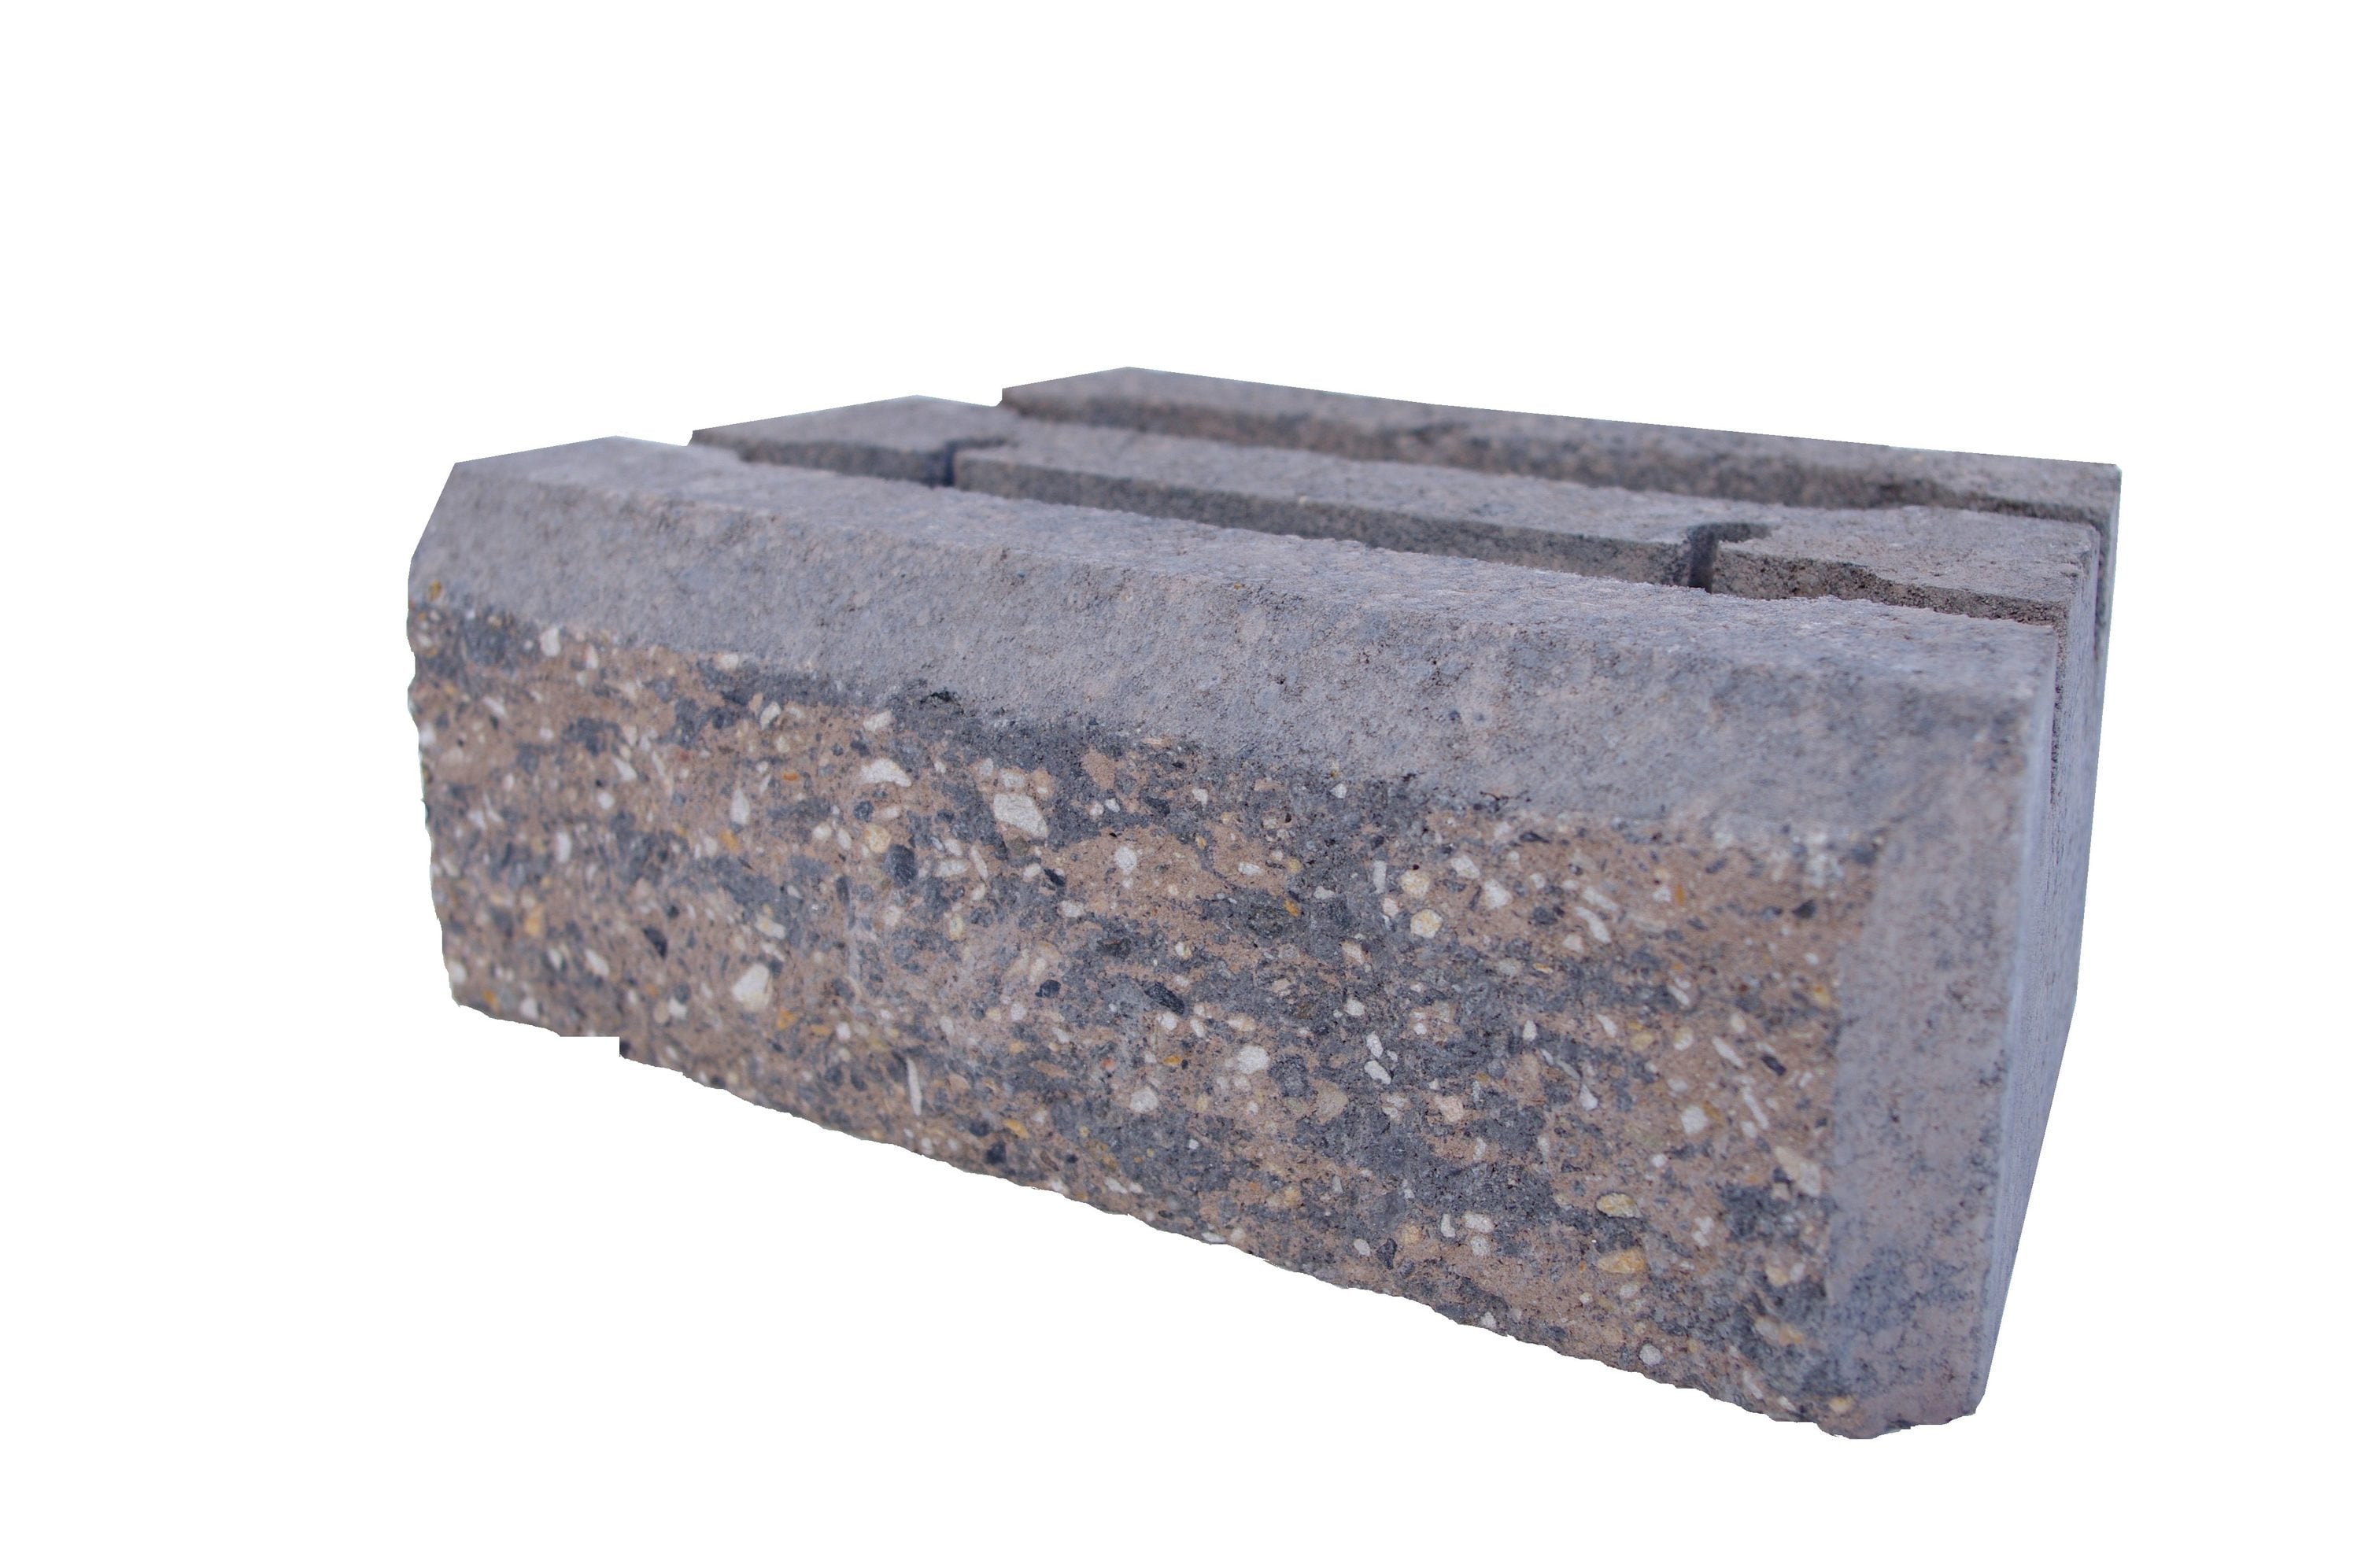 Lowe's Insignia 12-in L x 4-in H x 7-in D Brown/Charcoal Blend Retaining Wall Block | KIWBC